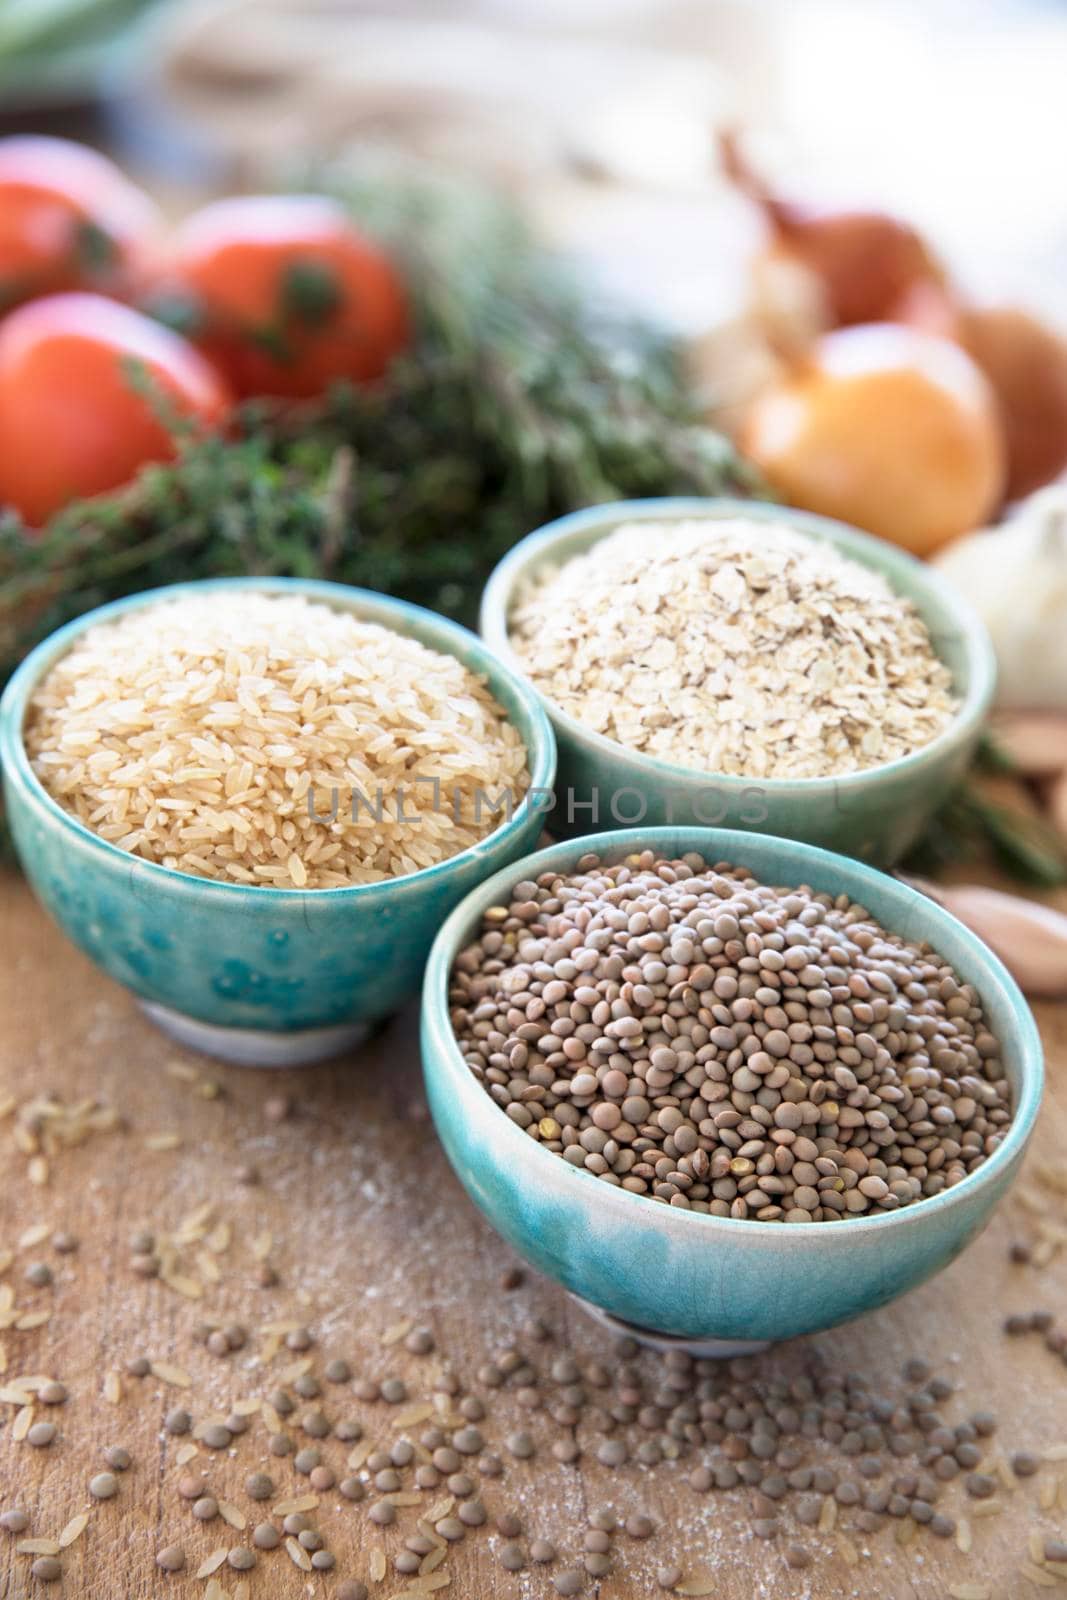 Healthy grains:  lentils, brown rice, and oats in bowls with veggies in the background.